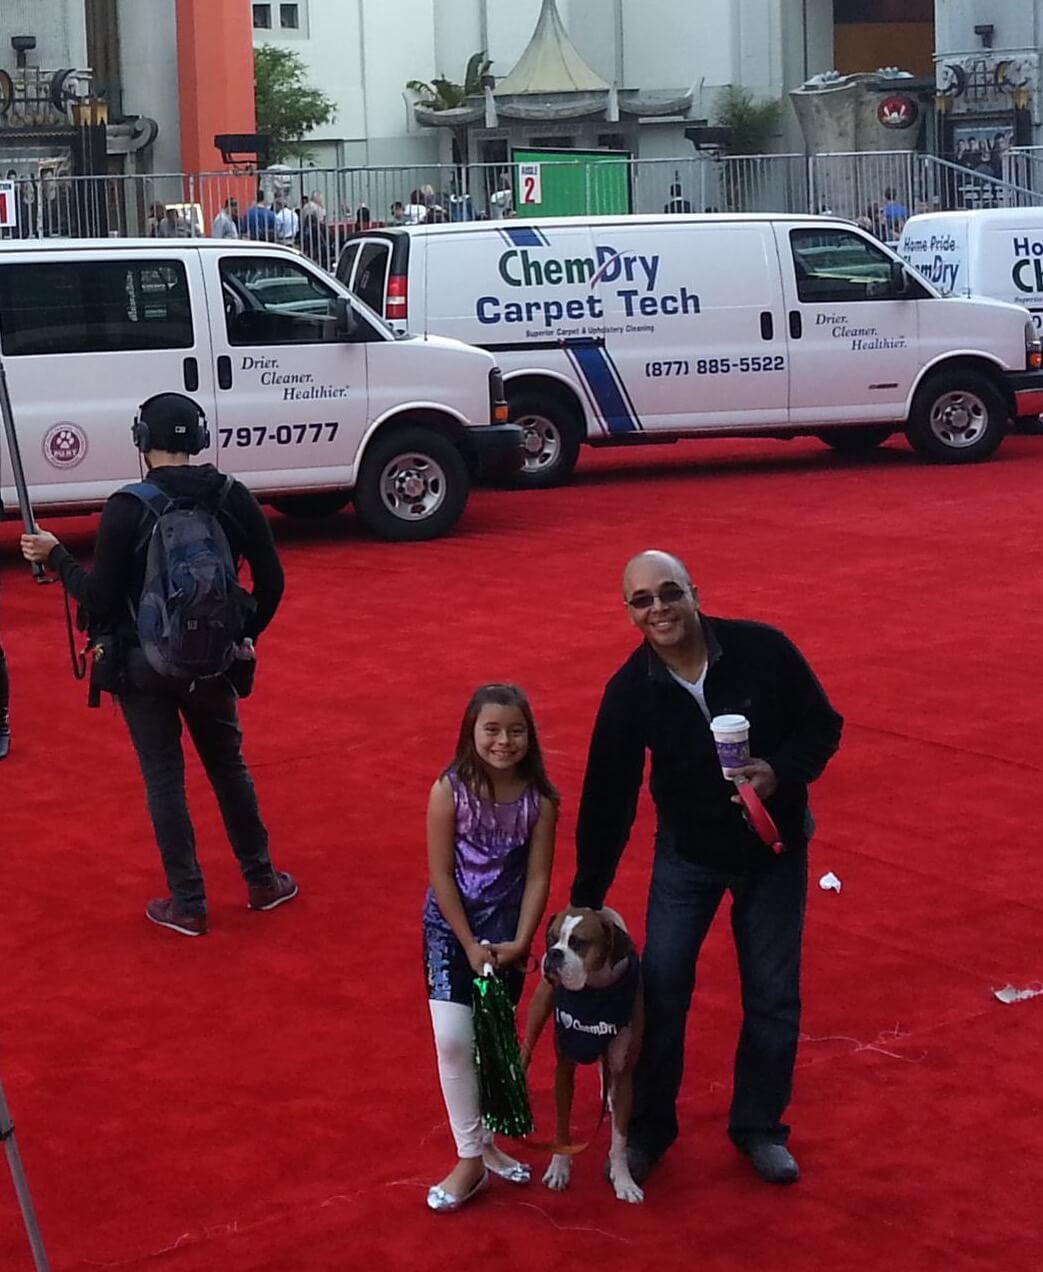 Chem-Dry Carpet Tech owner, Ed Ramia, cleaning the red carpet in Los Angeles Chem-Dry Carpet Tech Simi Valley Simi Valley (805)244-8725